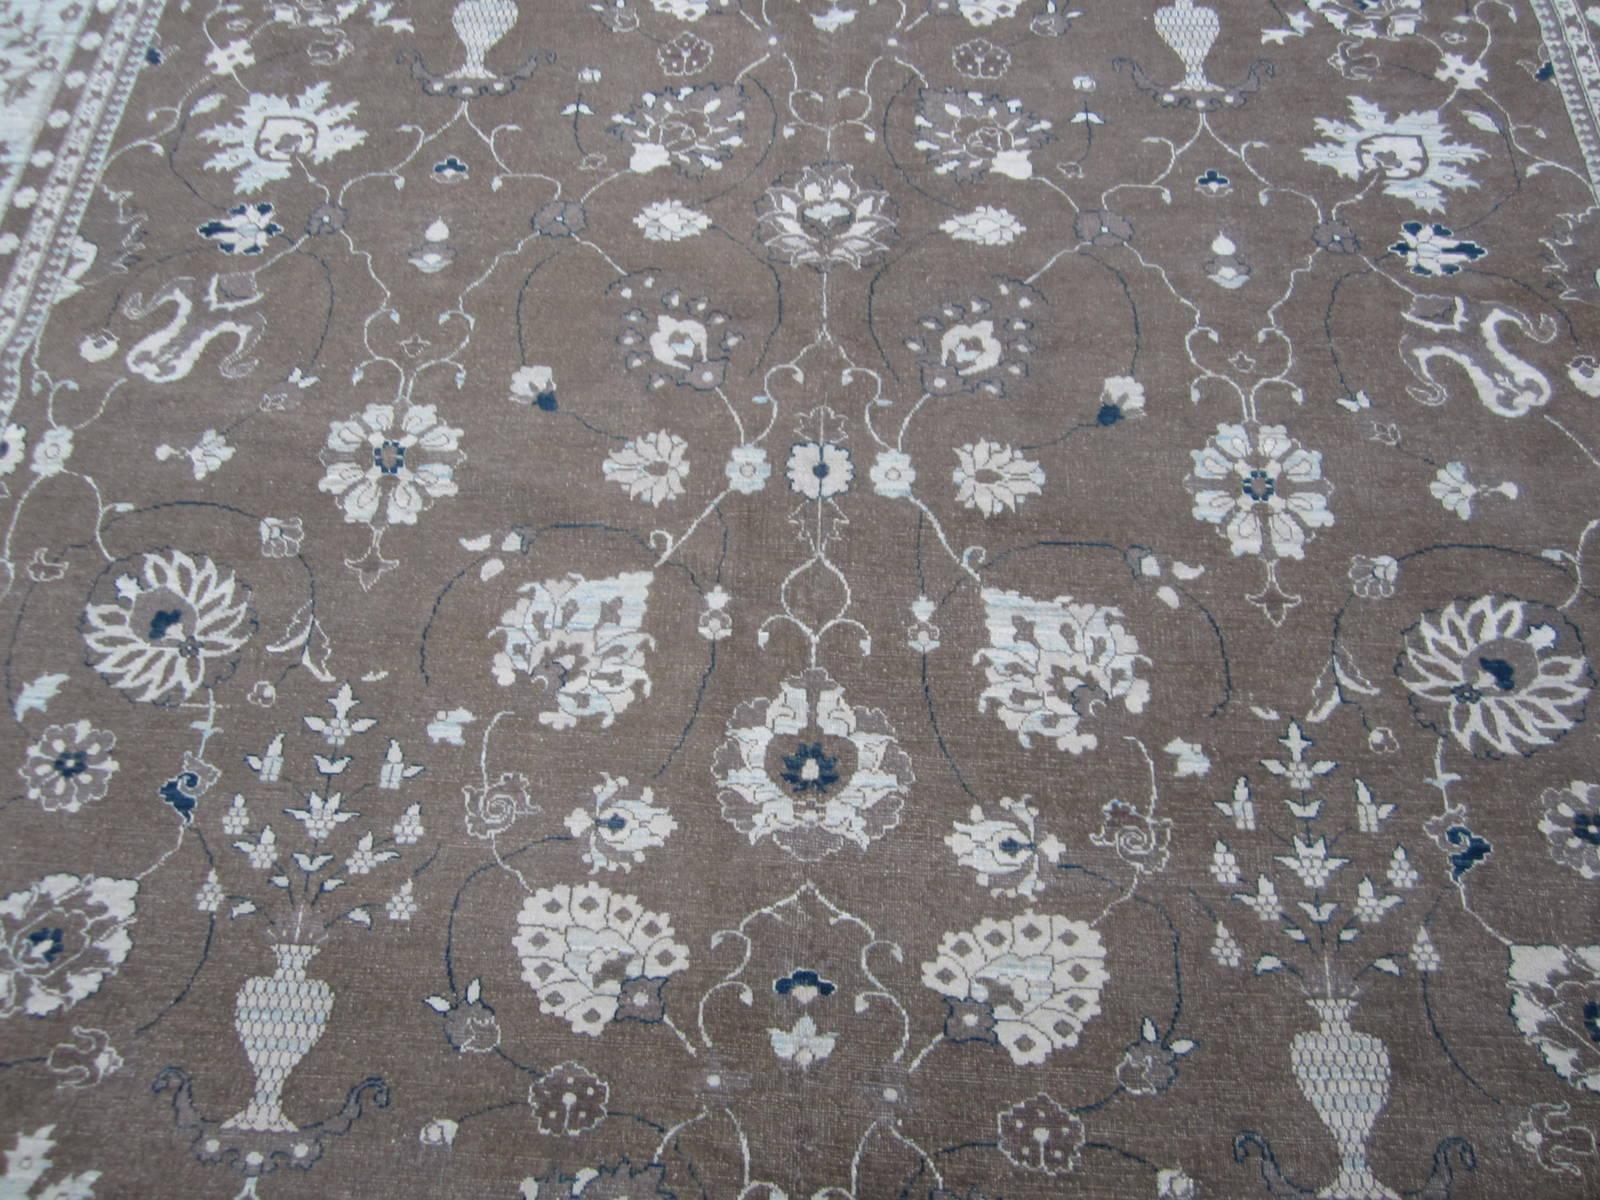 Brown, beige, taupe and blue tones make this elegant traditional style area rug one of the most versatile rugs you'll find. Hand knotted wool also makes it one of the most durable. Great for the living room or bedroom. Made in Pakistan using vegetal